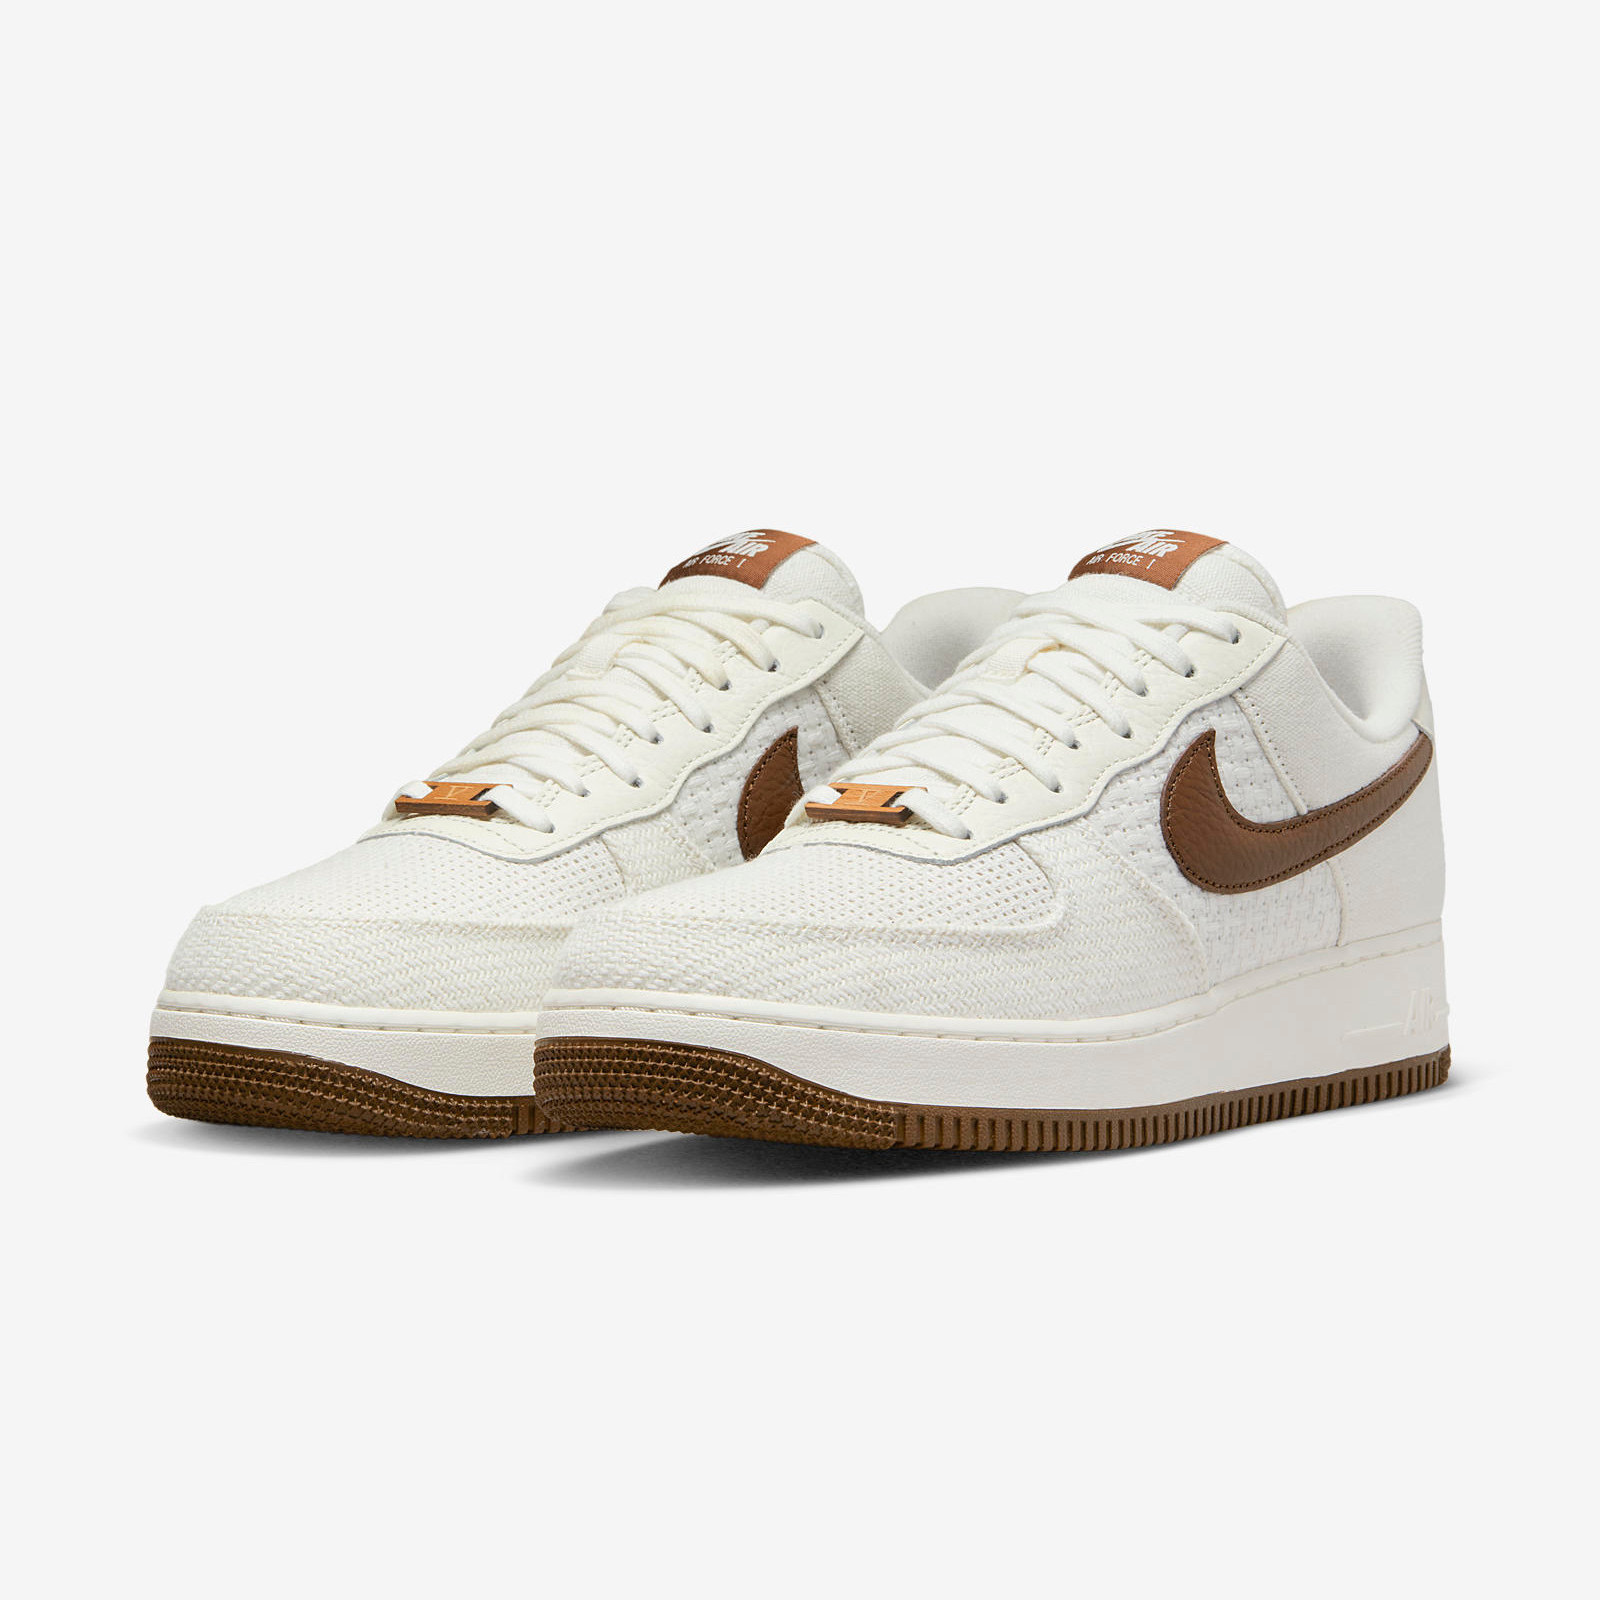 Nike Air Force 1
« SNKRS Day »